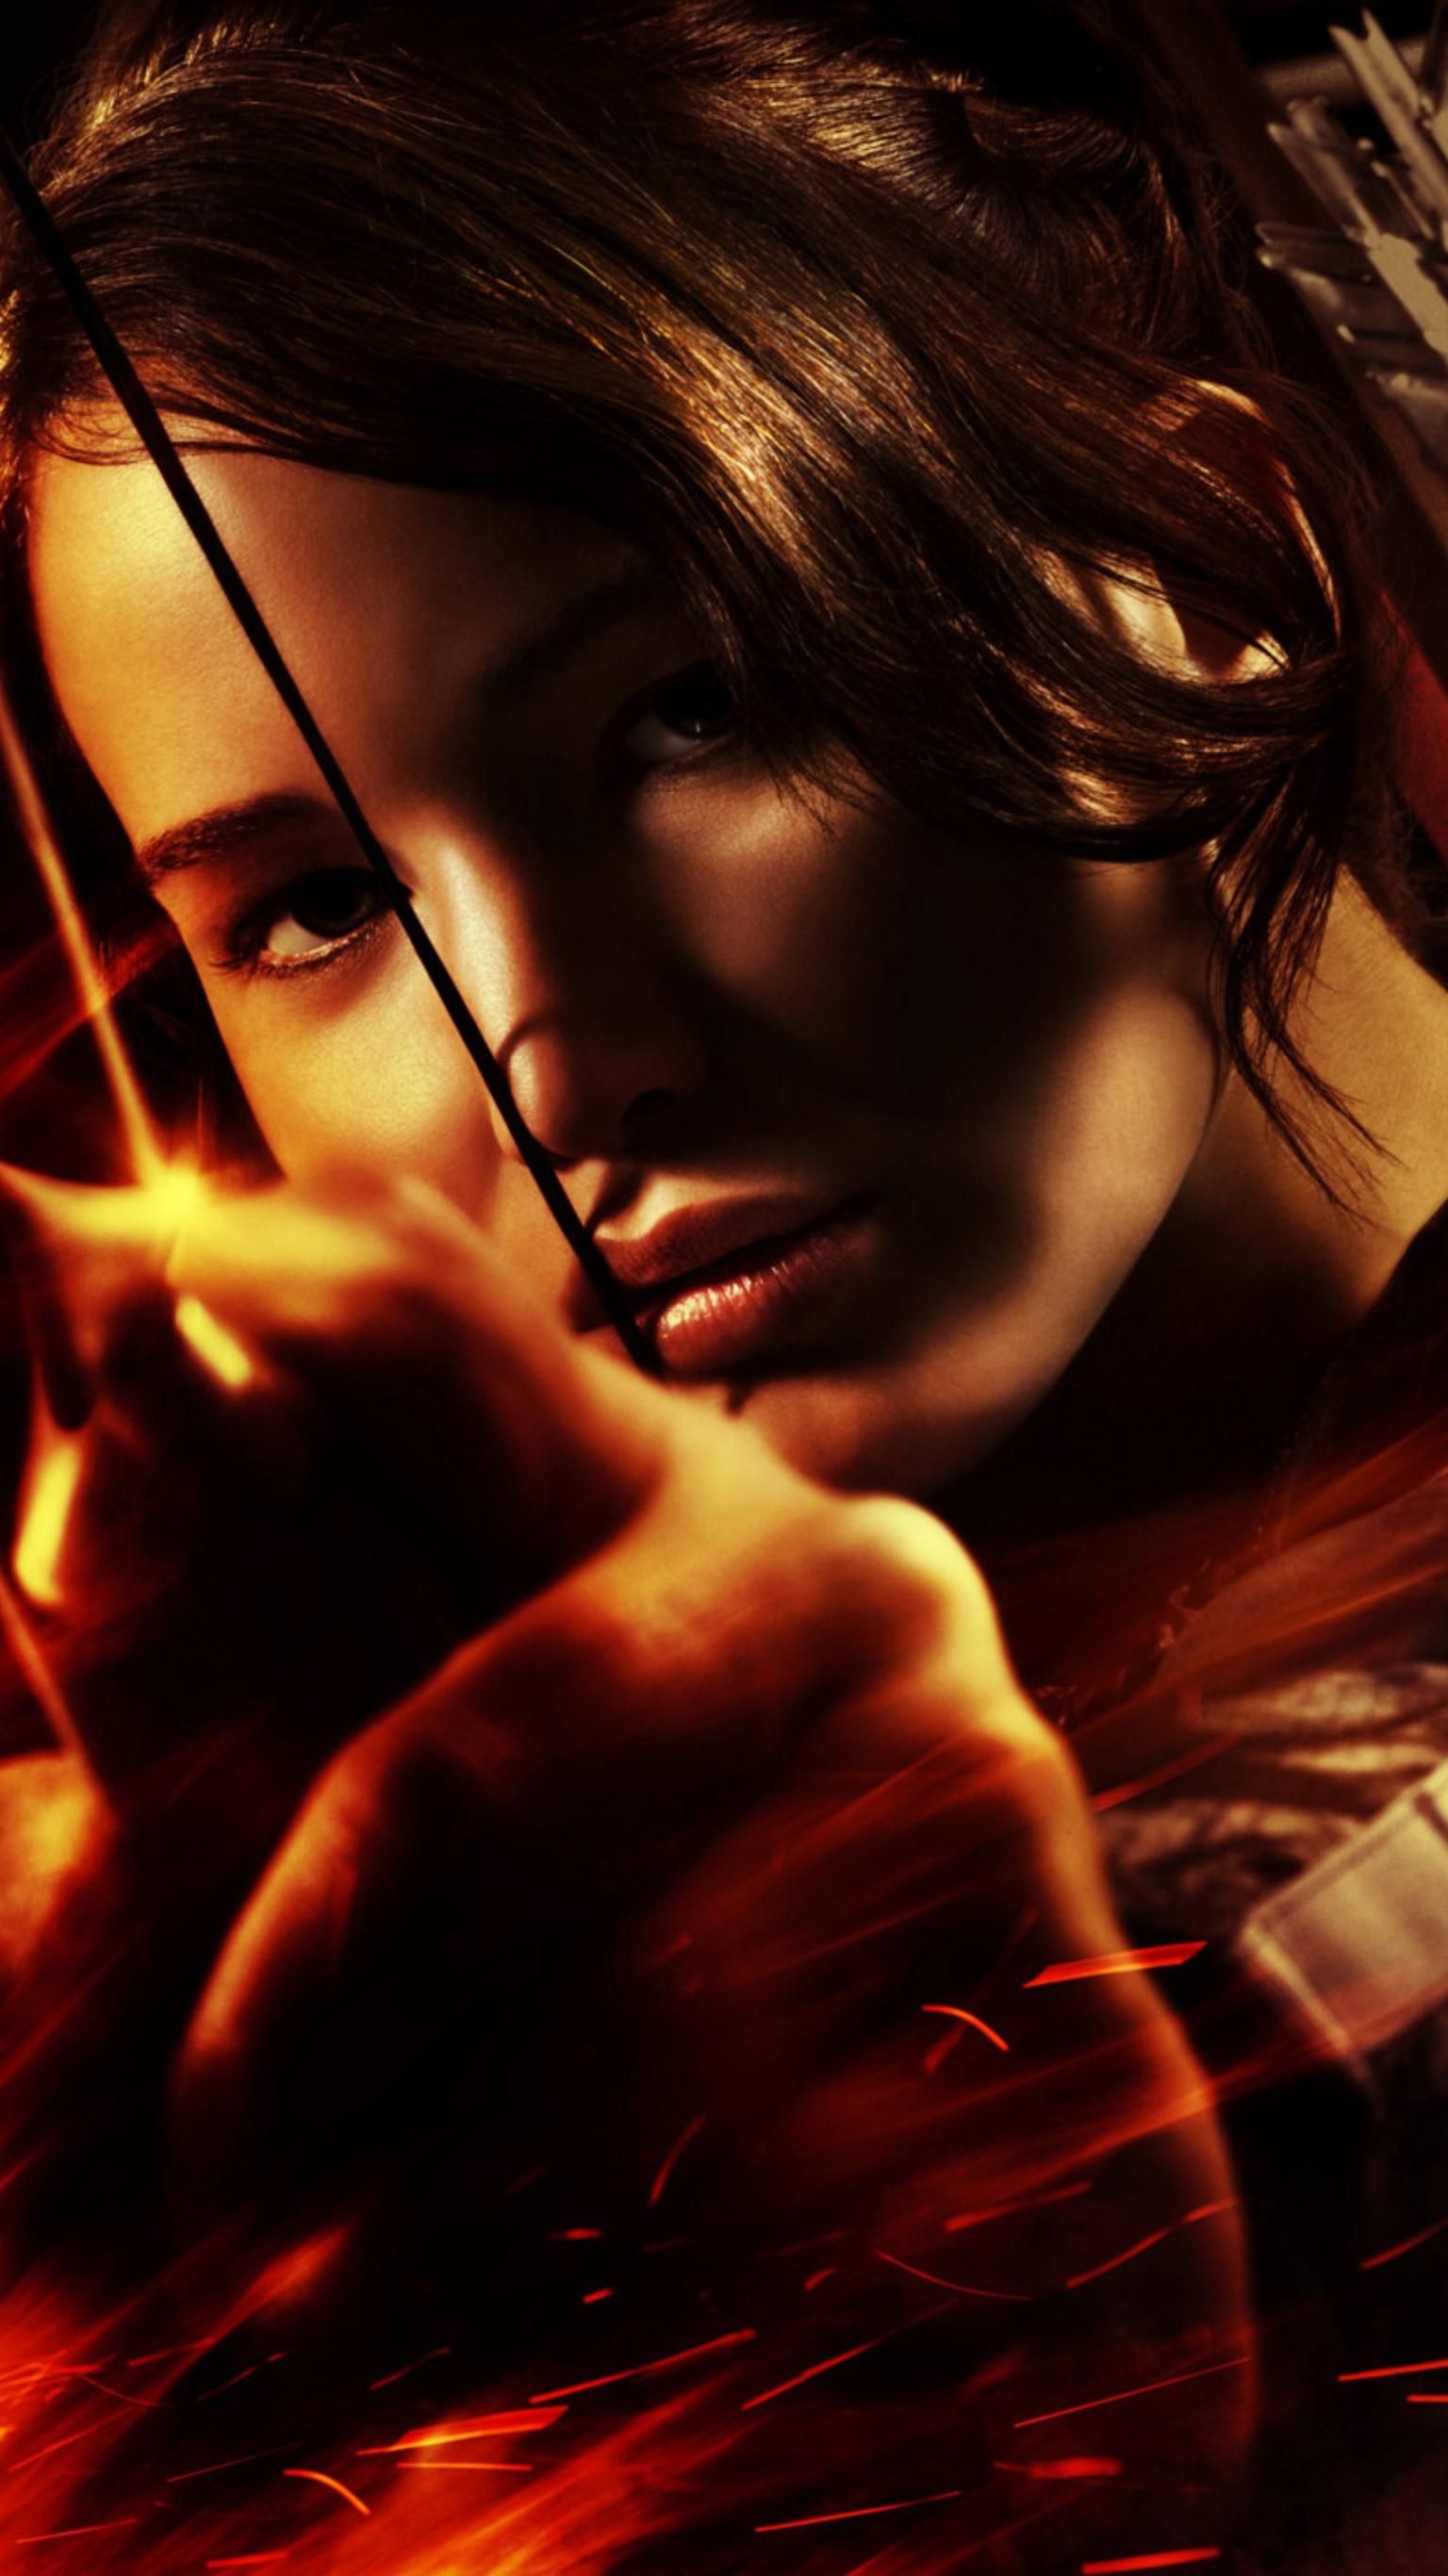 Hunger Games: A 2012 American dystopian action film directed by Gary Ross. 1540x2740 HD Background.